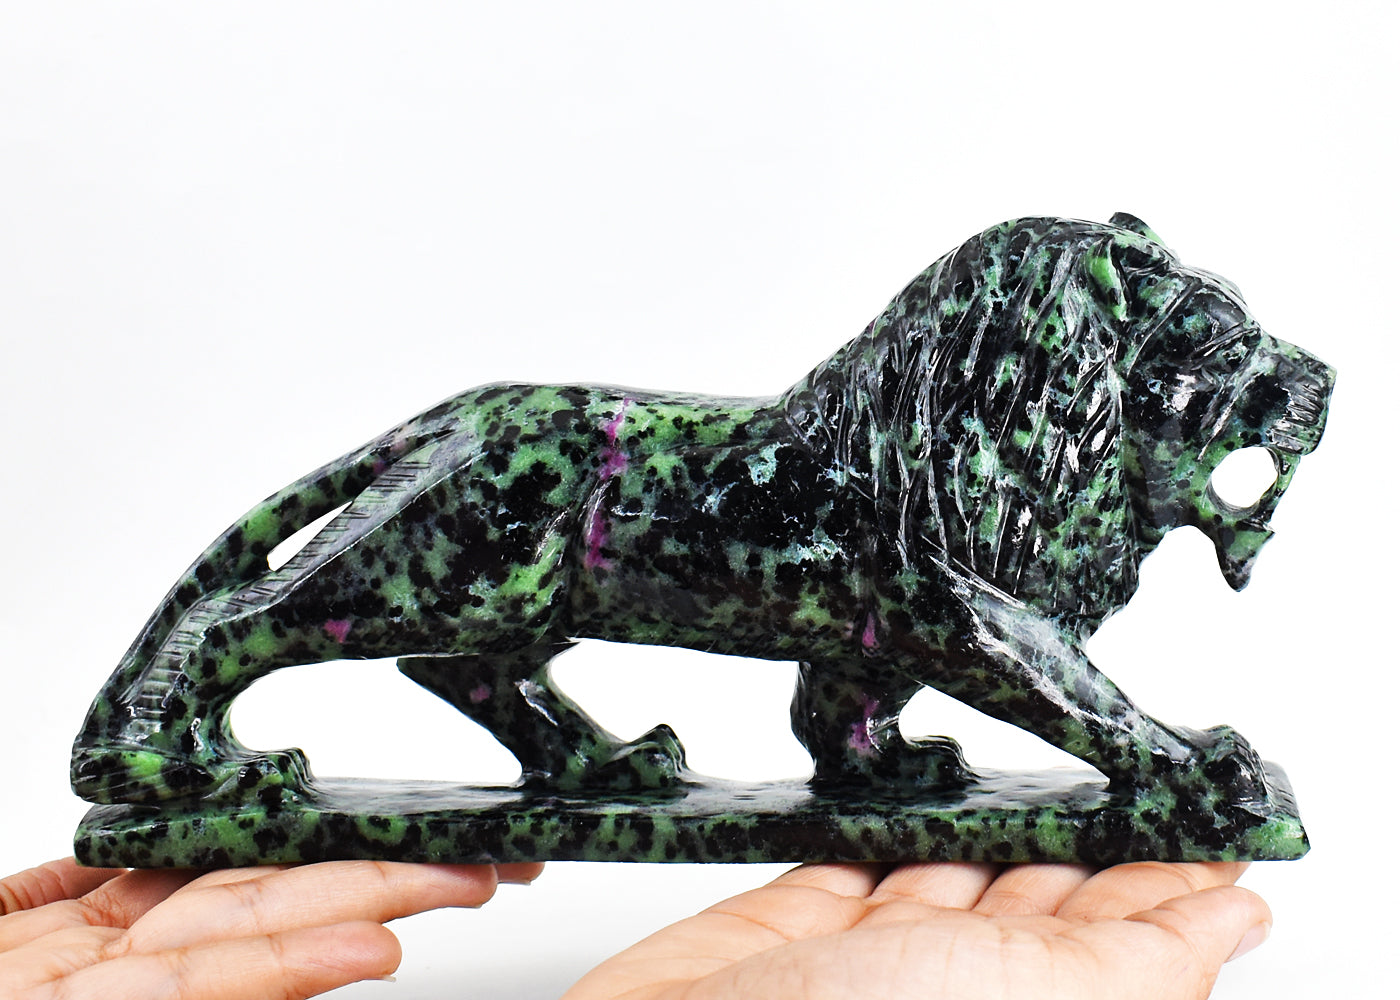 Artisian  6040.00 Carats  Genuine Ruby Zoisite Hand Carved  Crystal Gemstone Carving Lion